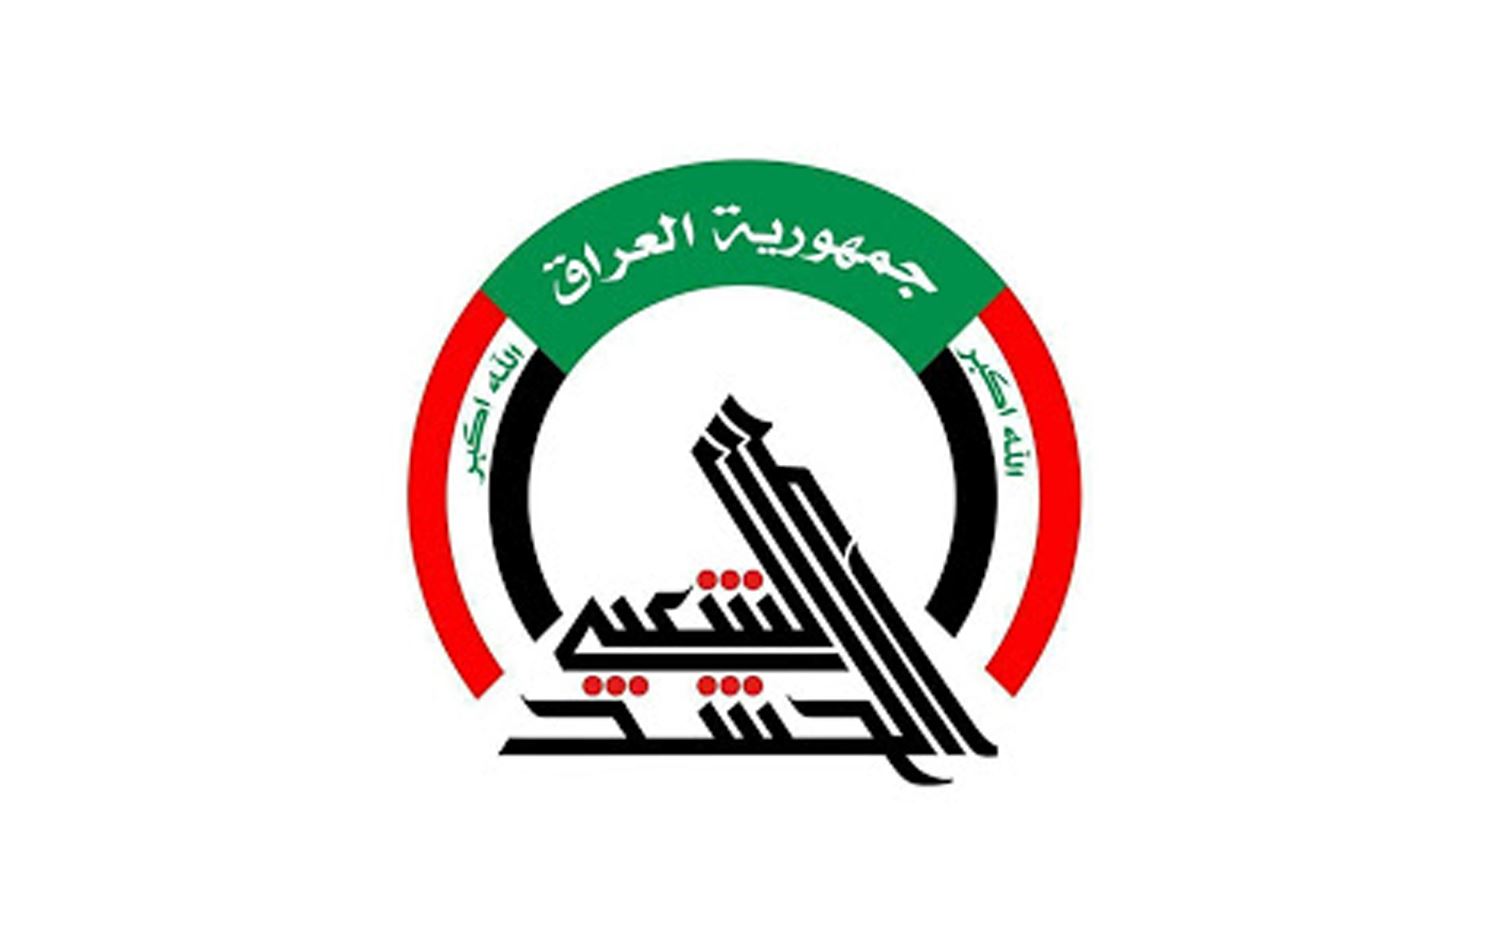 PMF calls for expulsion of foreign troops following attacks and Haniyeh's assassination